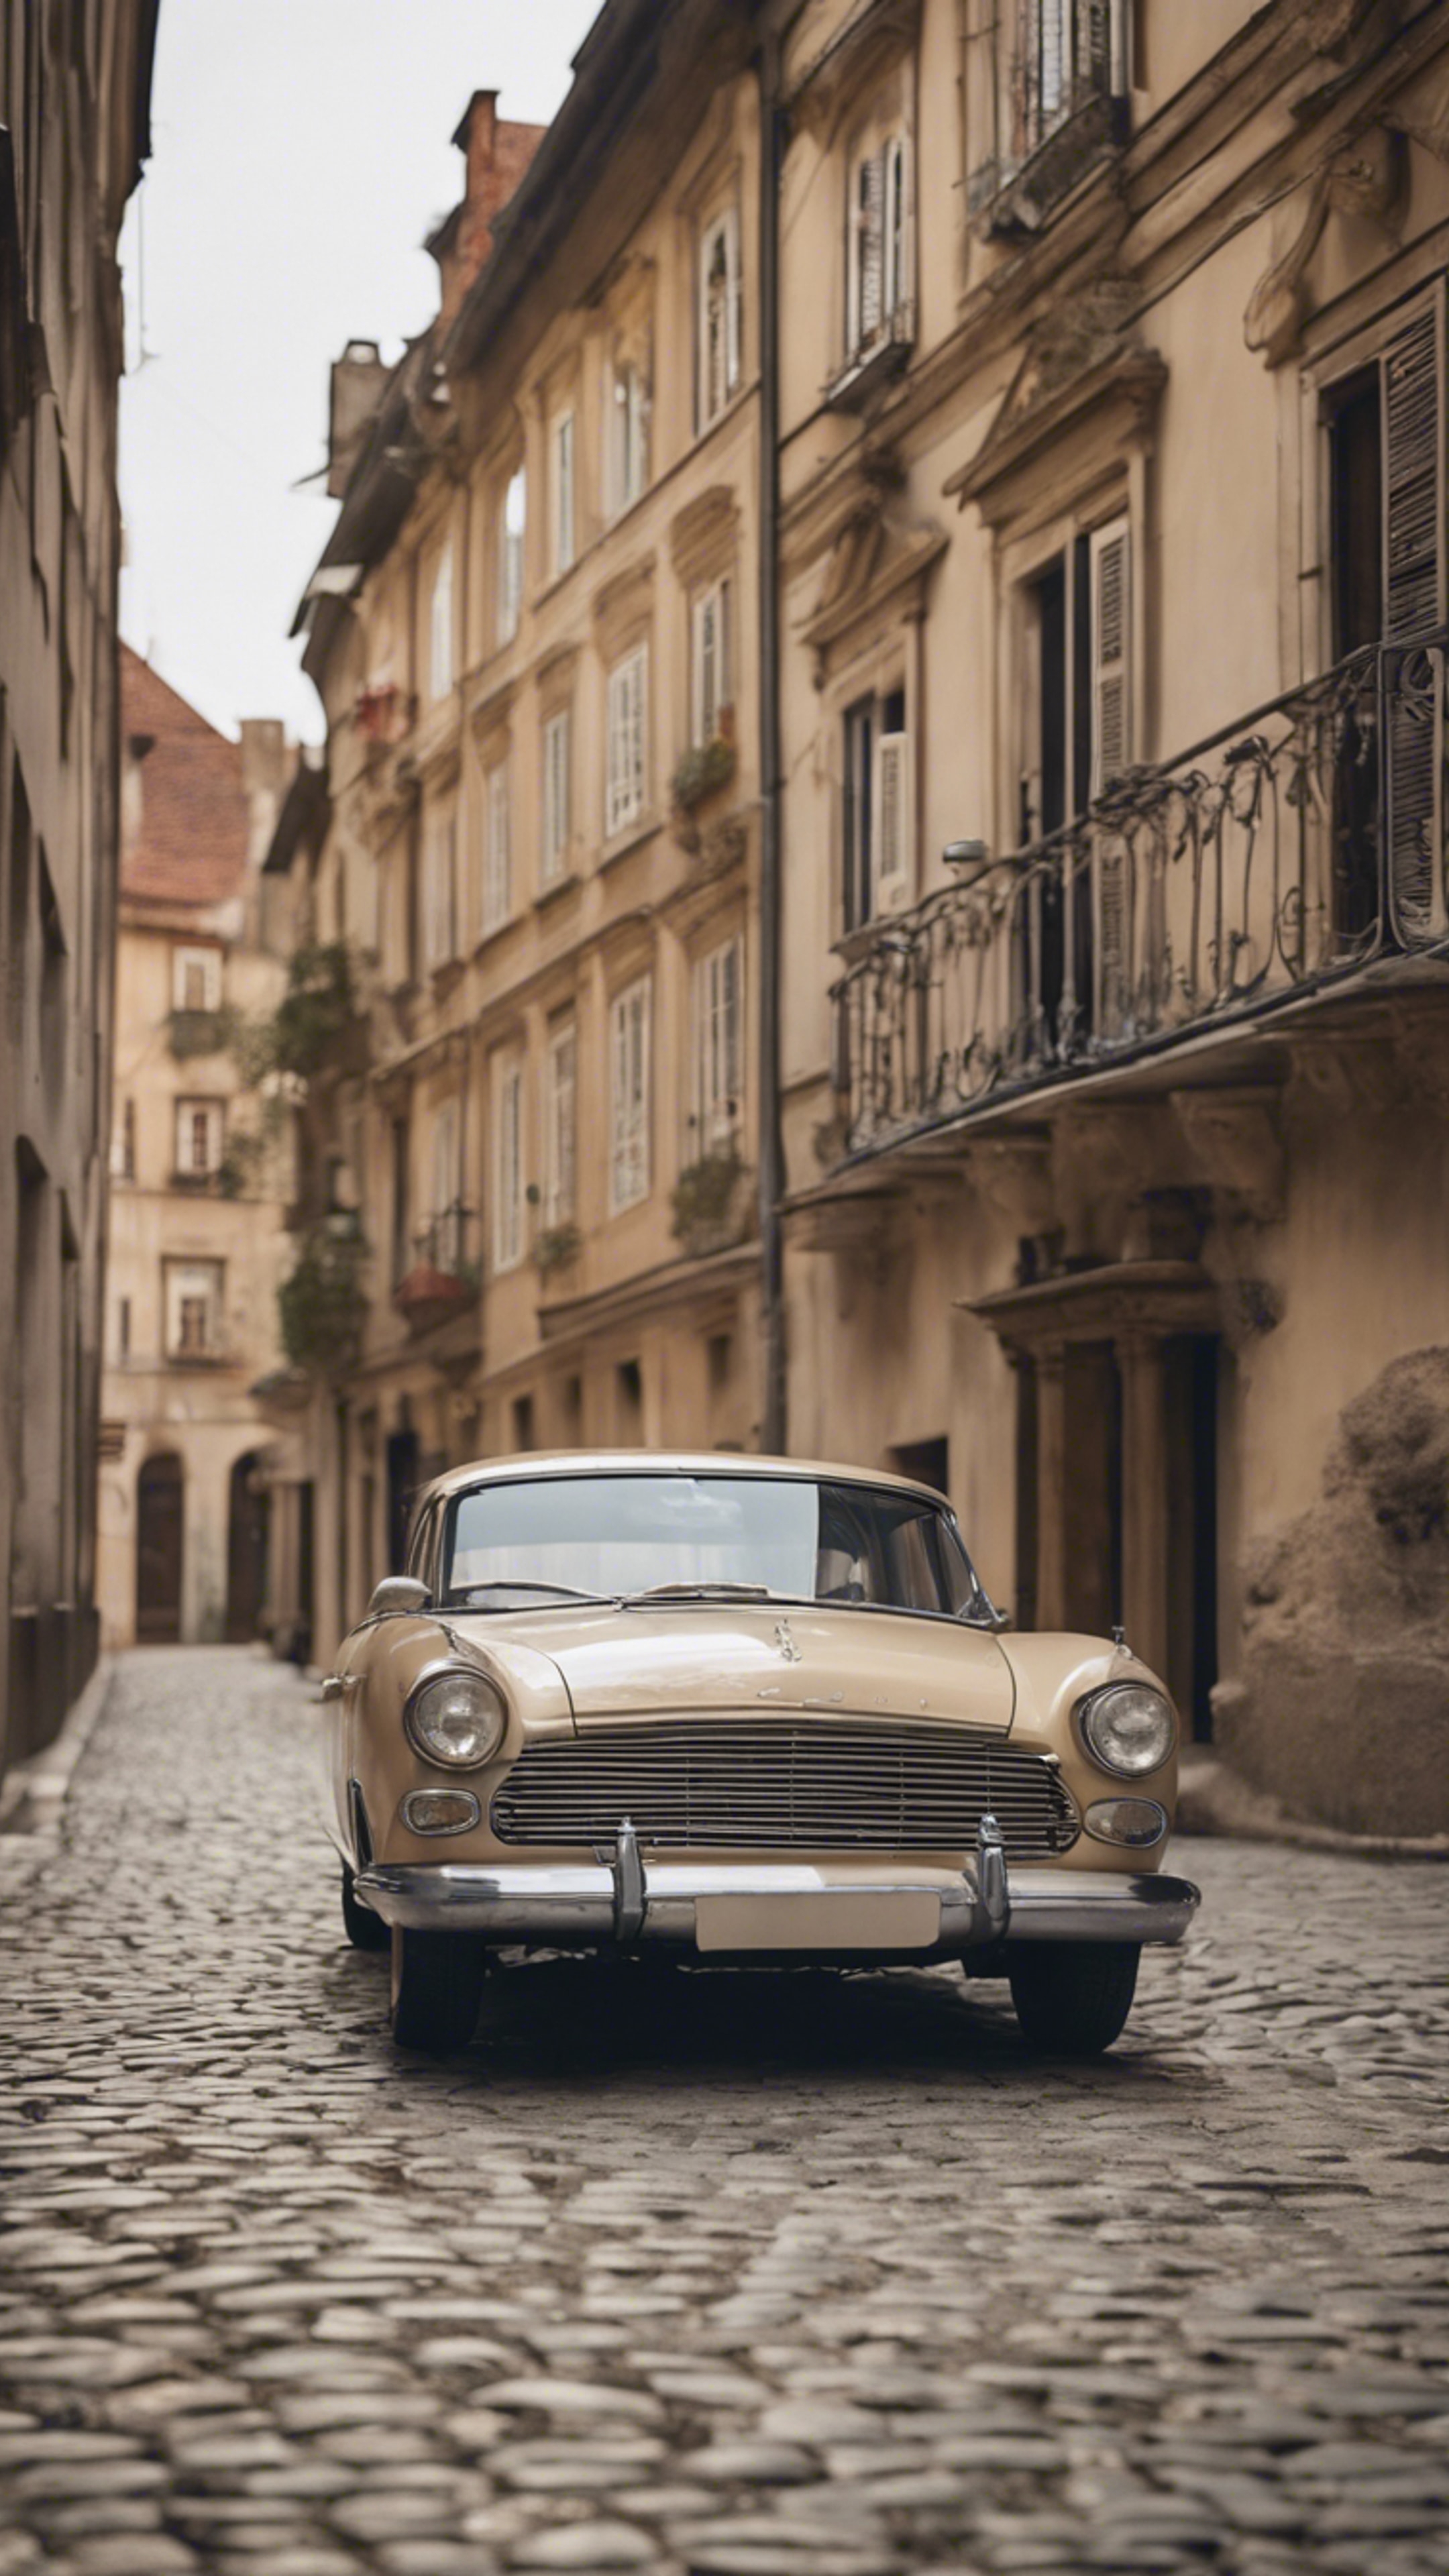 A beige classic car parked on a cobblestone street with rustic buildings in the background. Sfondo[31a873a8b96b4be69c6a]